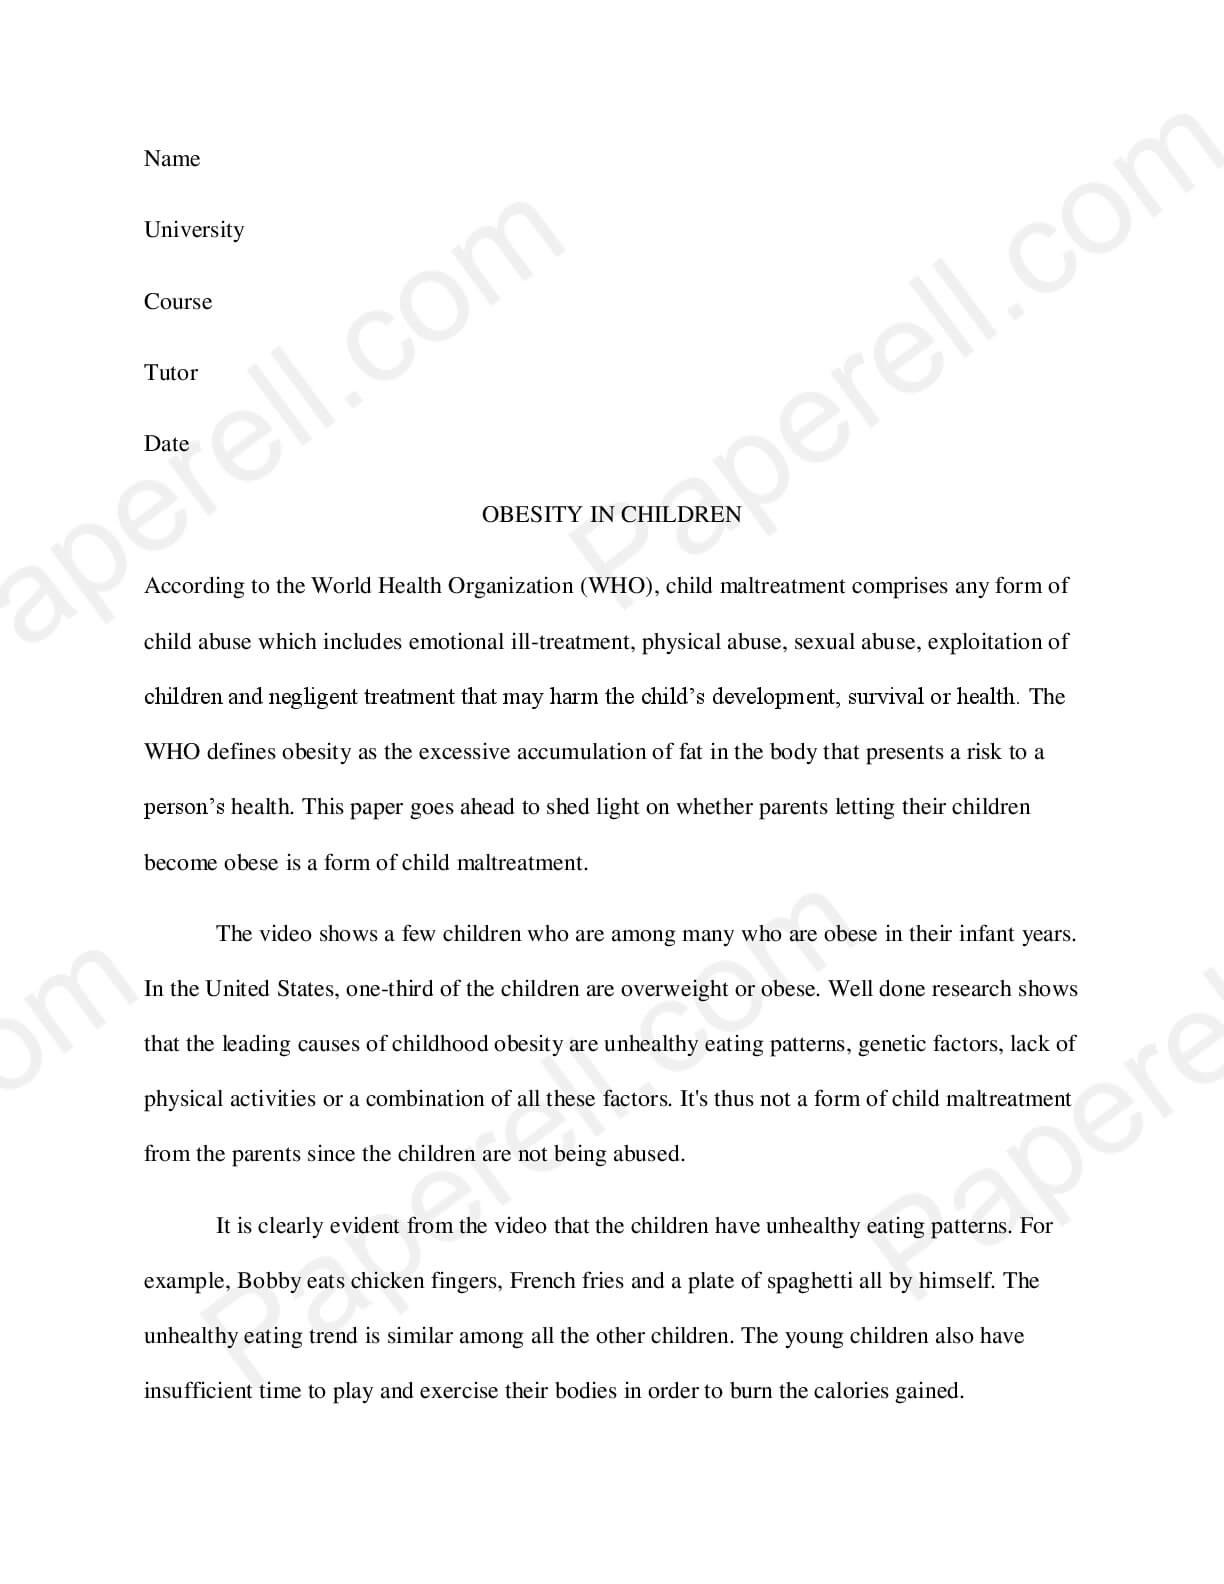 Order of research paper